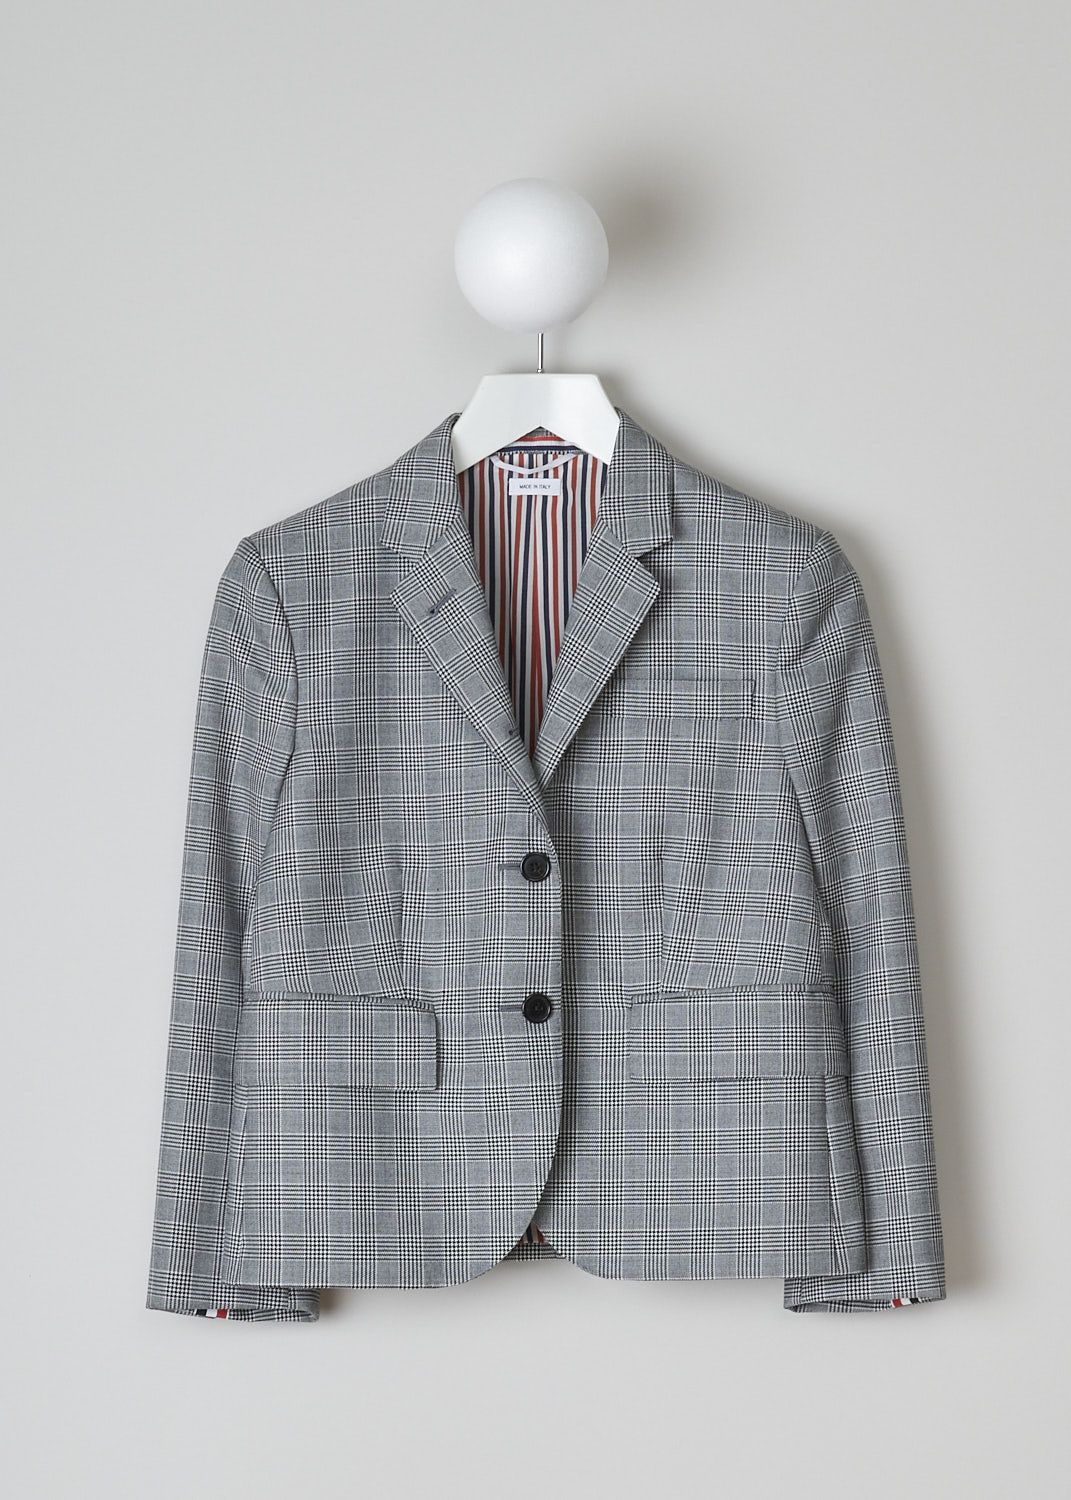 THOM BROWNE, BLACK AND WHITE CHECK SPORT JACKET, FBC010A_25057_980, Black, White, Front, This single-breasted sport jacket has a black and white houndstooth check motif. The jacket has a notched lapel and a front button closure. In the front, the jacket has a single breast pocket and two flap welt pockets. On the inside, the jacket has a striped lining, three inner pockets and a name tag. The brand's signature striped grosgrain loop tab can be found in the back. The jacket has a double vent.  
